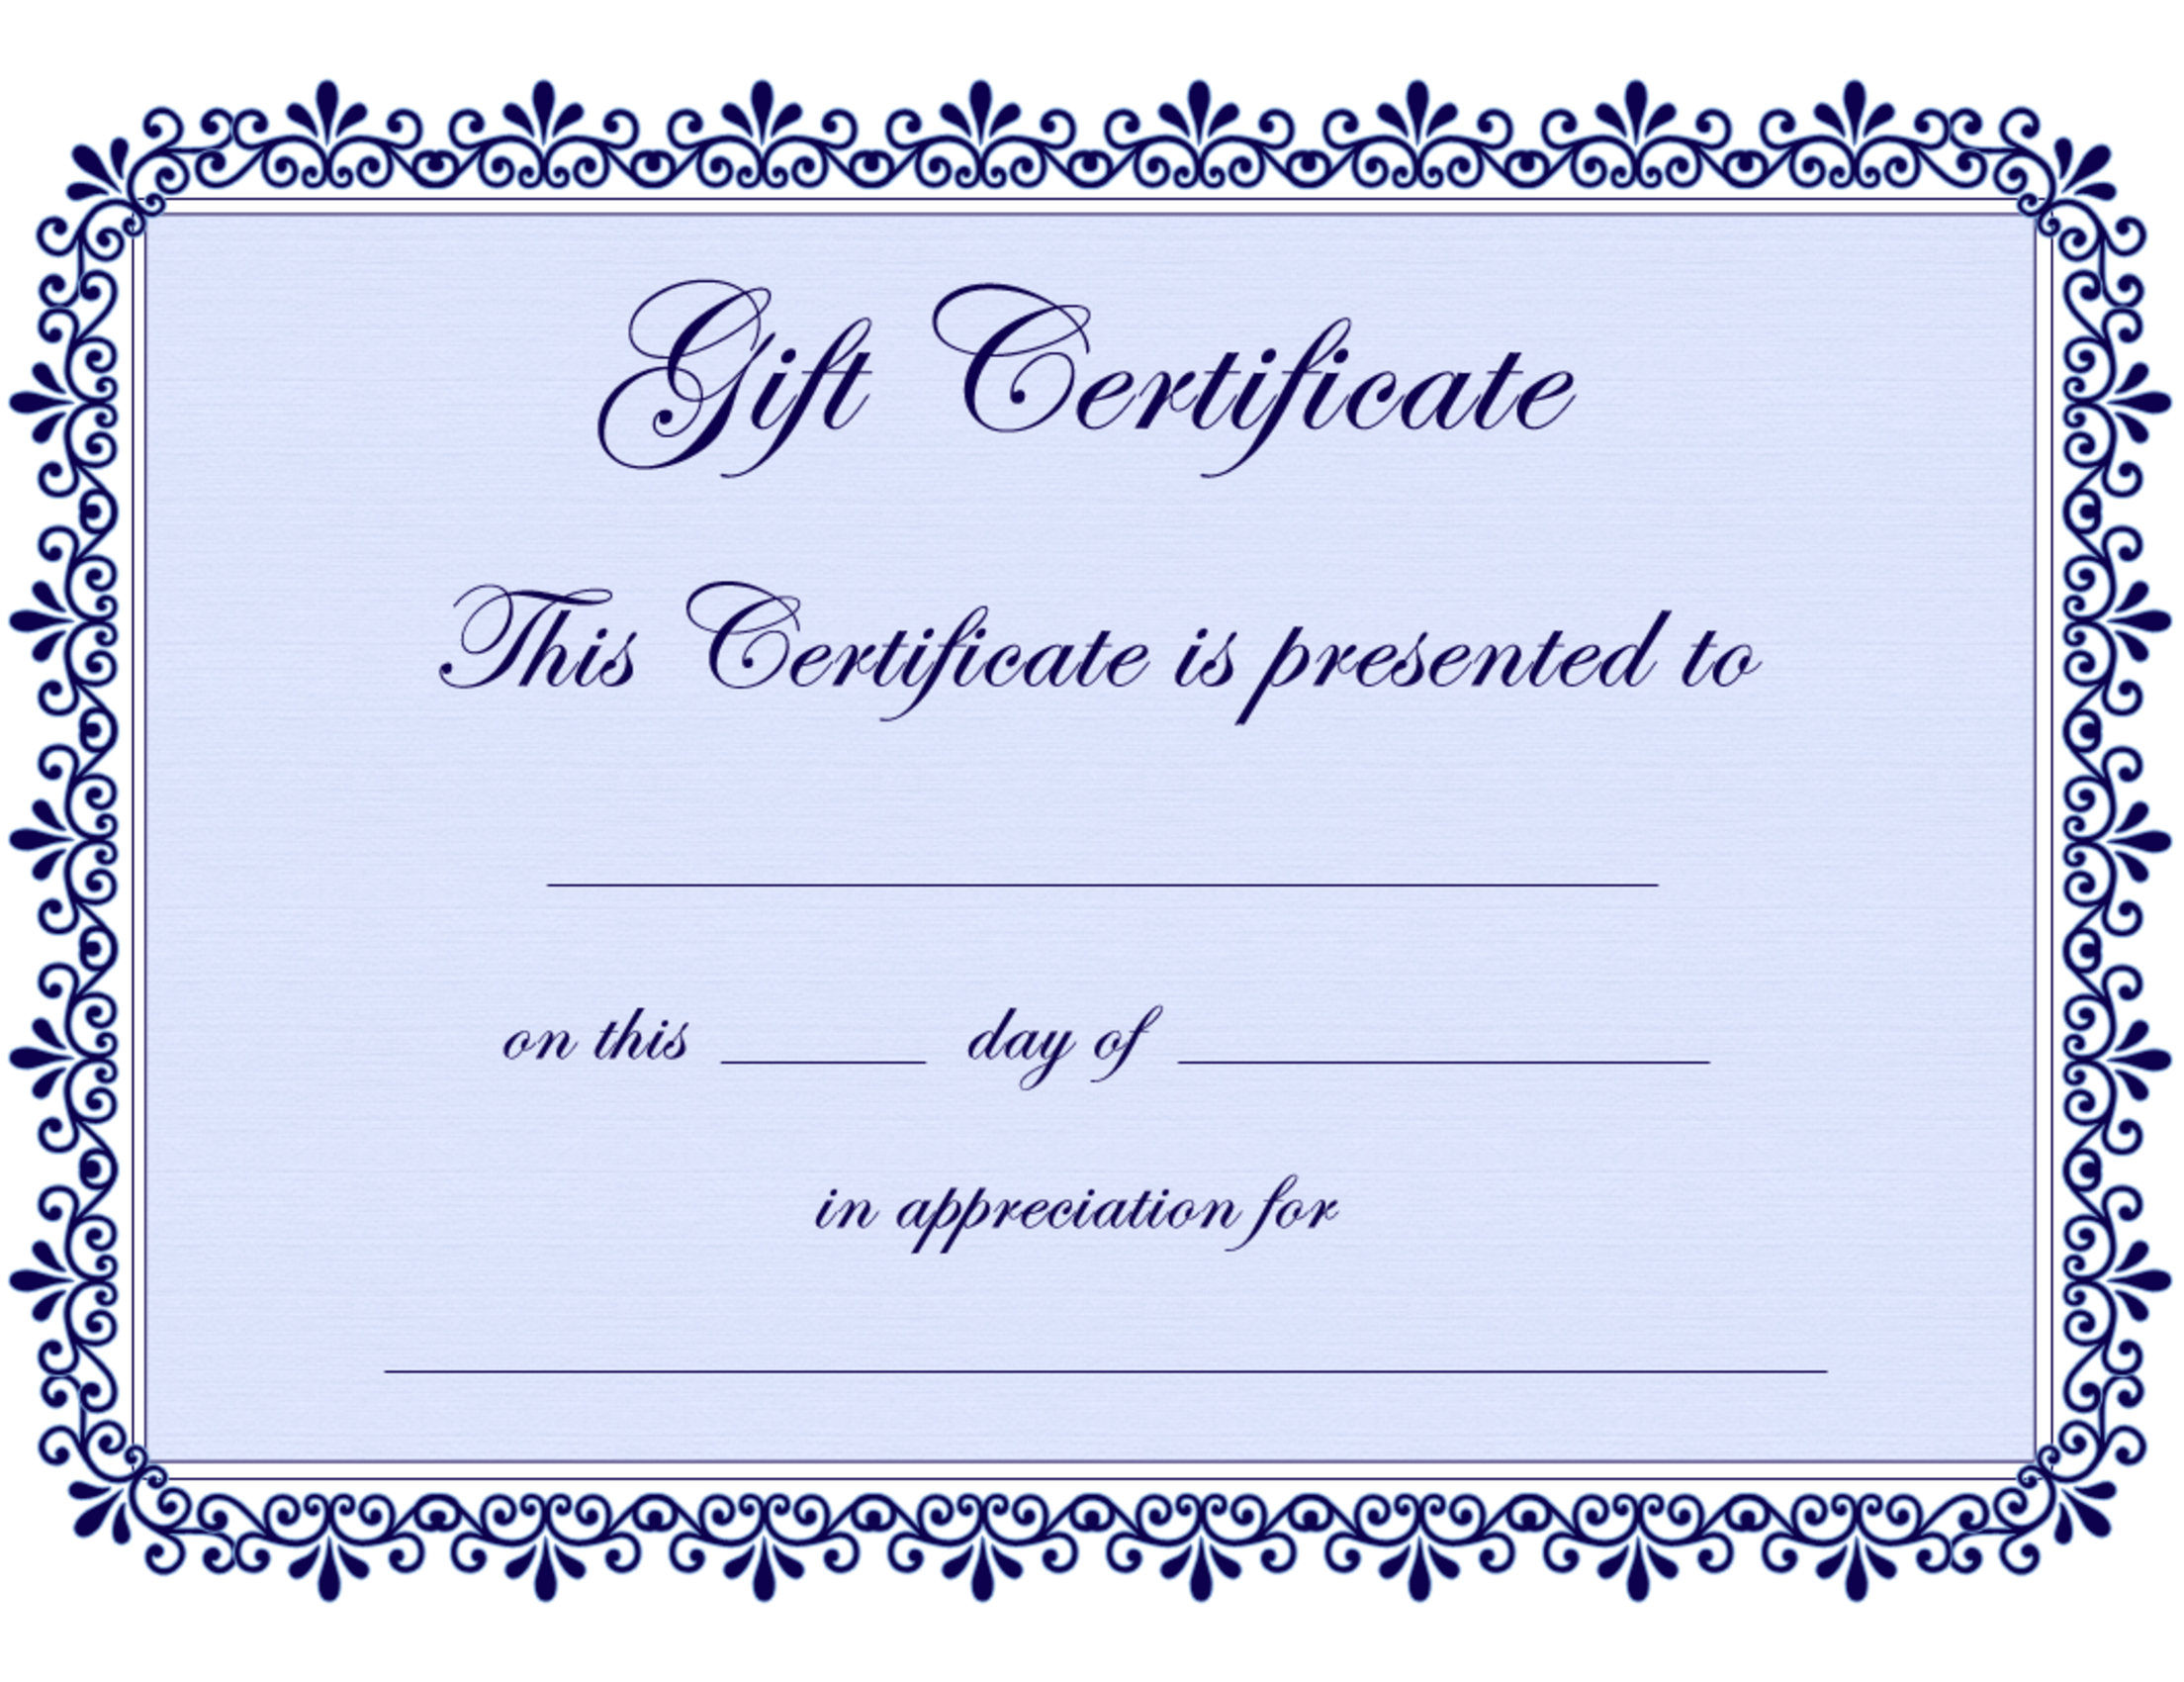 Clipart Gift Certificate Template For Present Certificate Templates